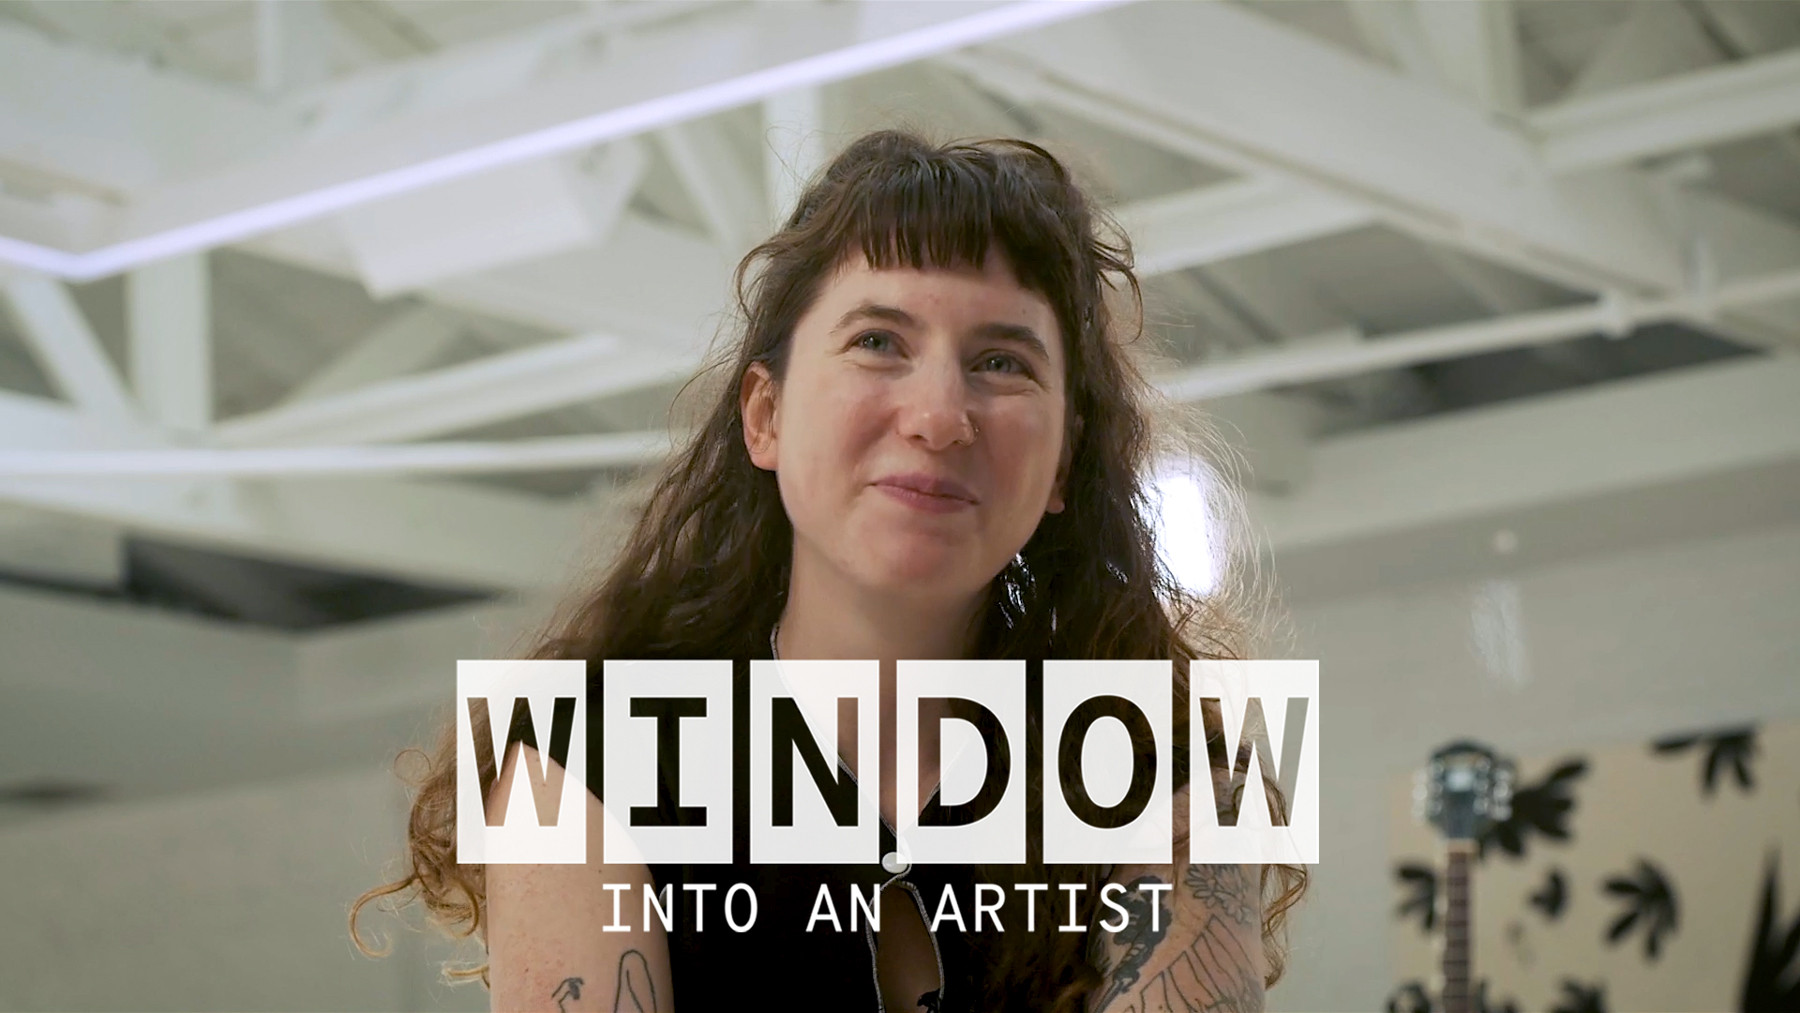 A close up of Karly Hartzman smiling. Text on the image reads ‘Window Into An Artist’.